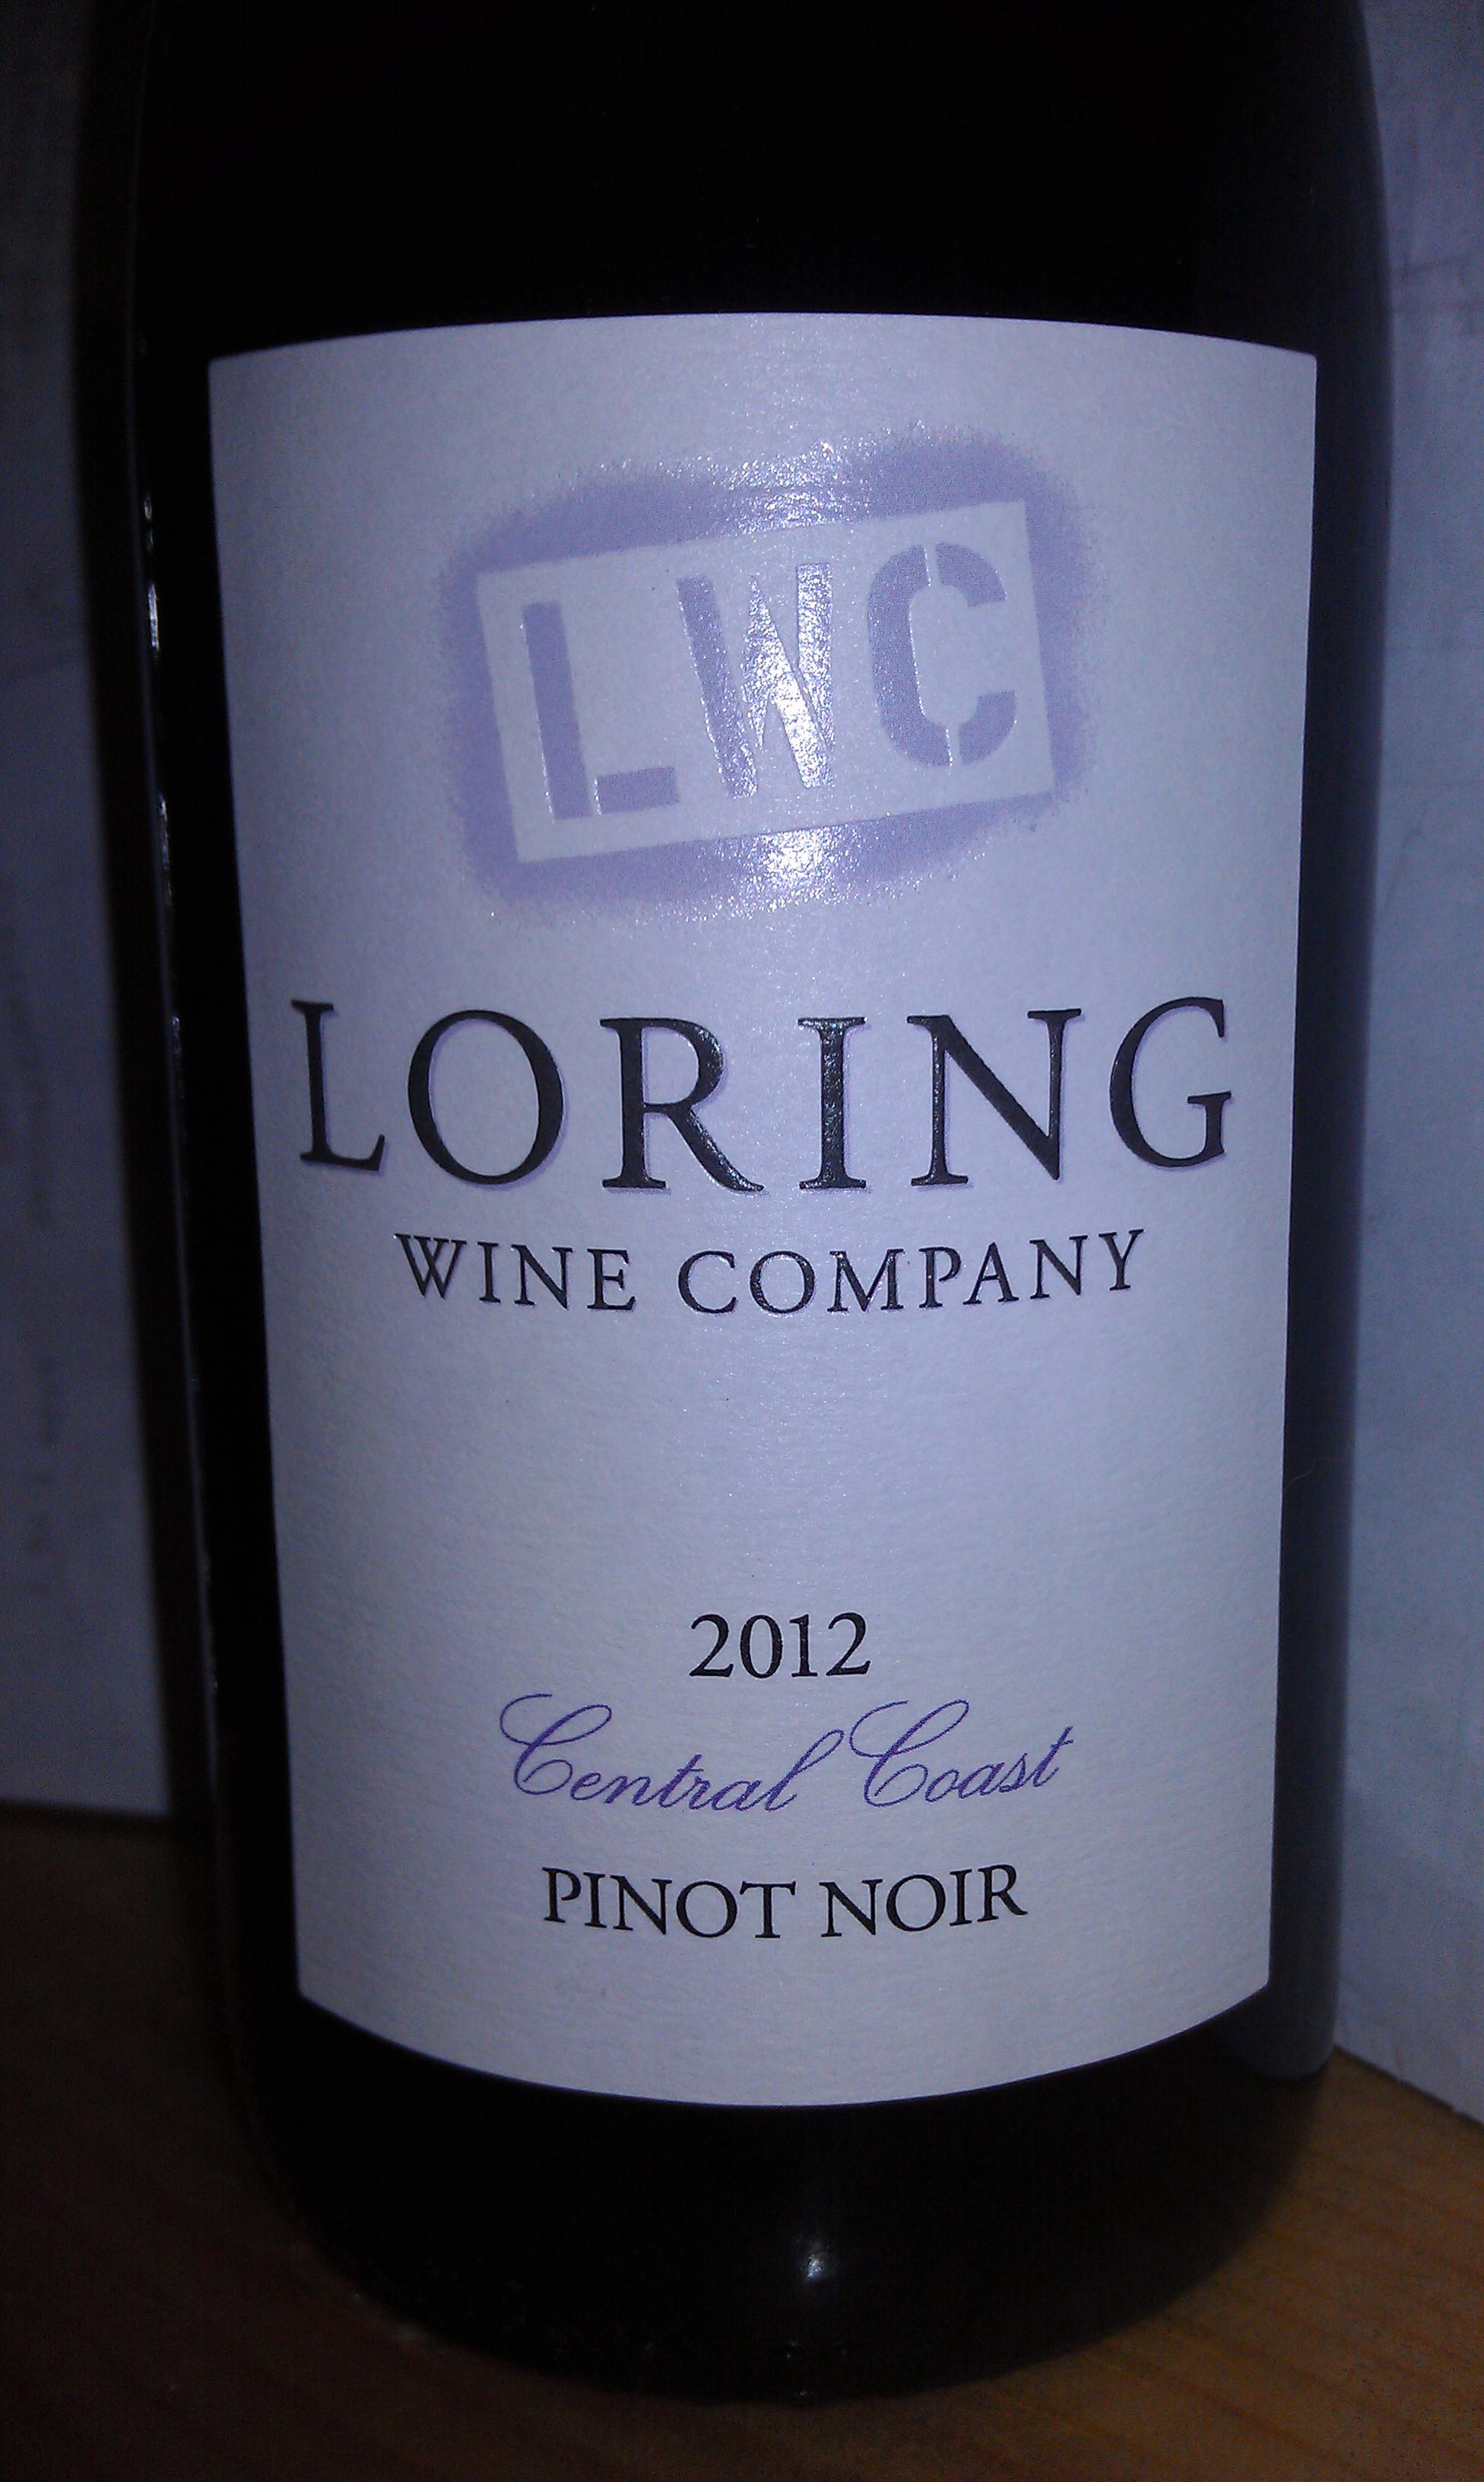 2012 Loring Wine Company Central Coast Pinot Noir - click image for full description